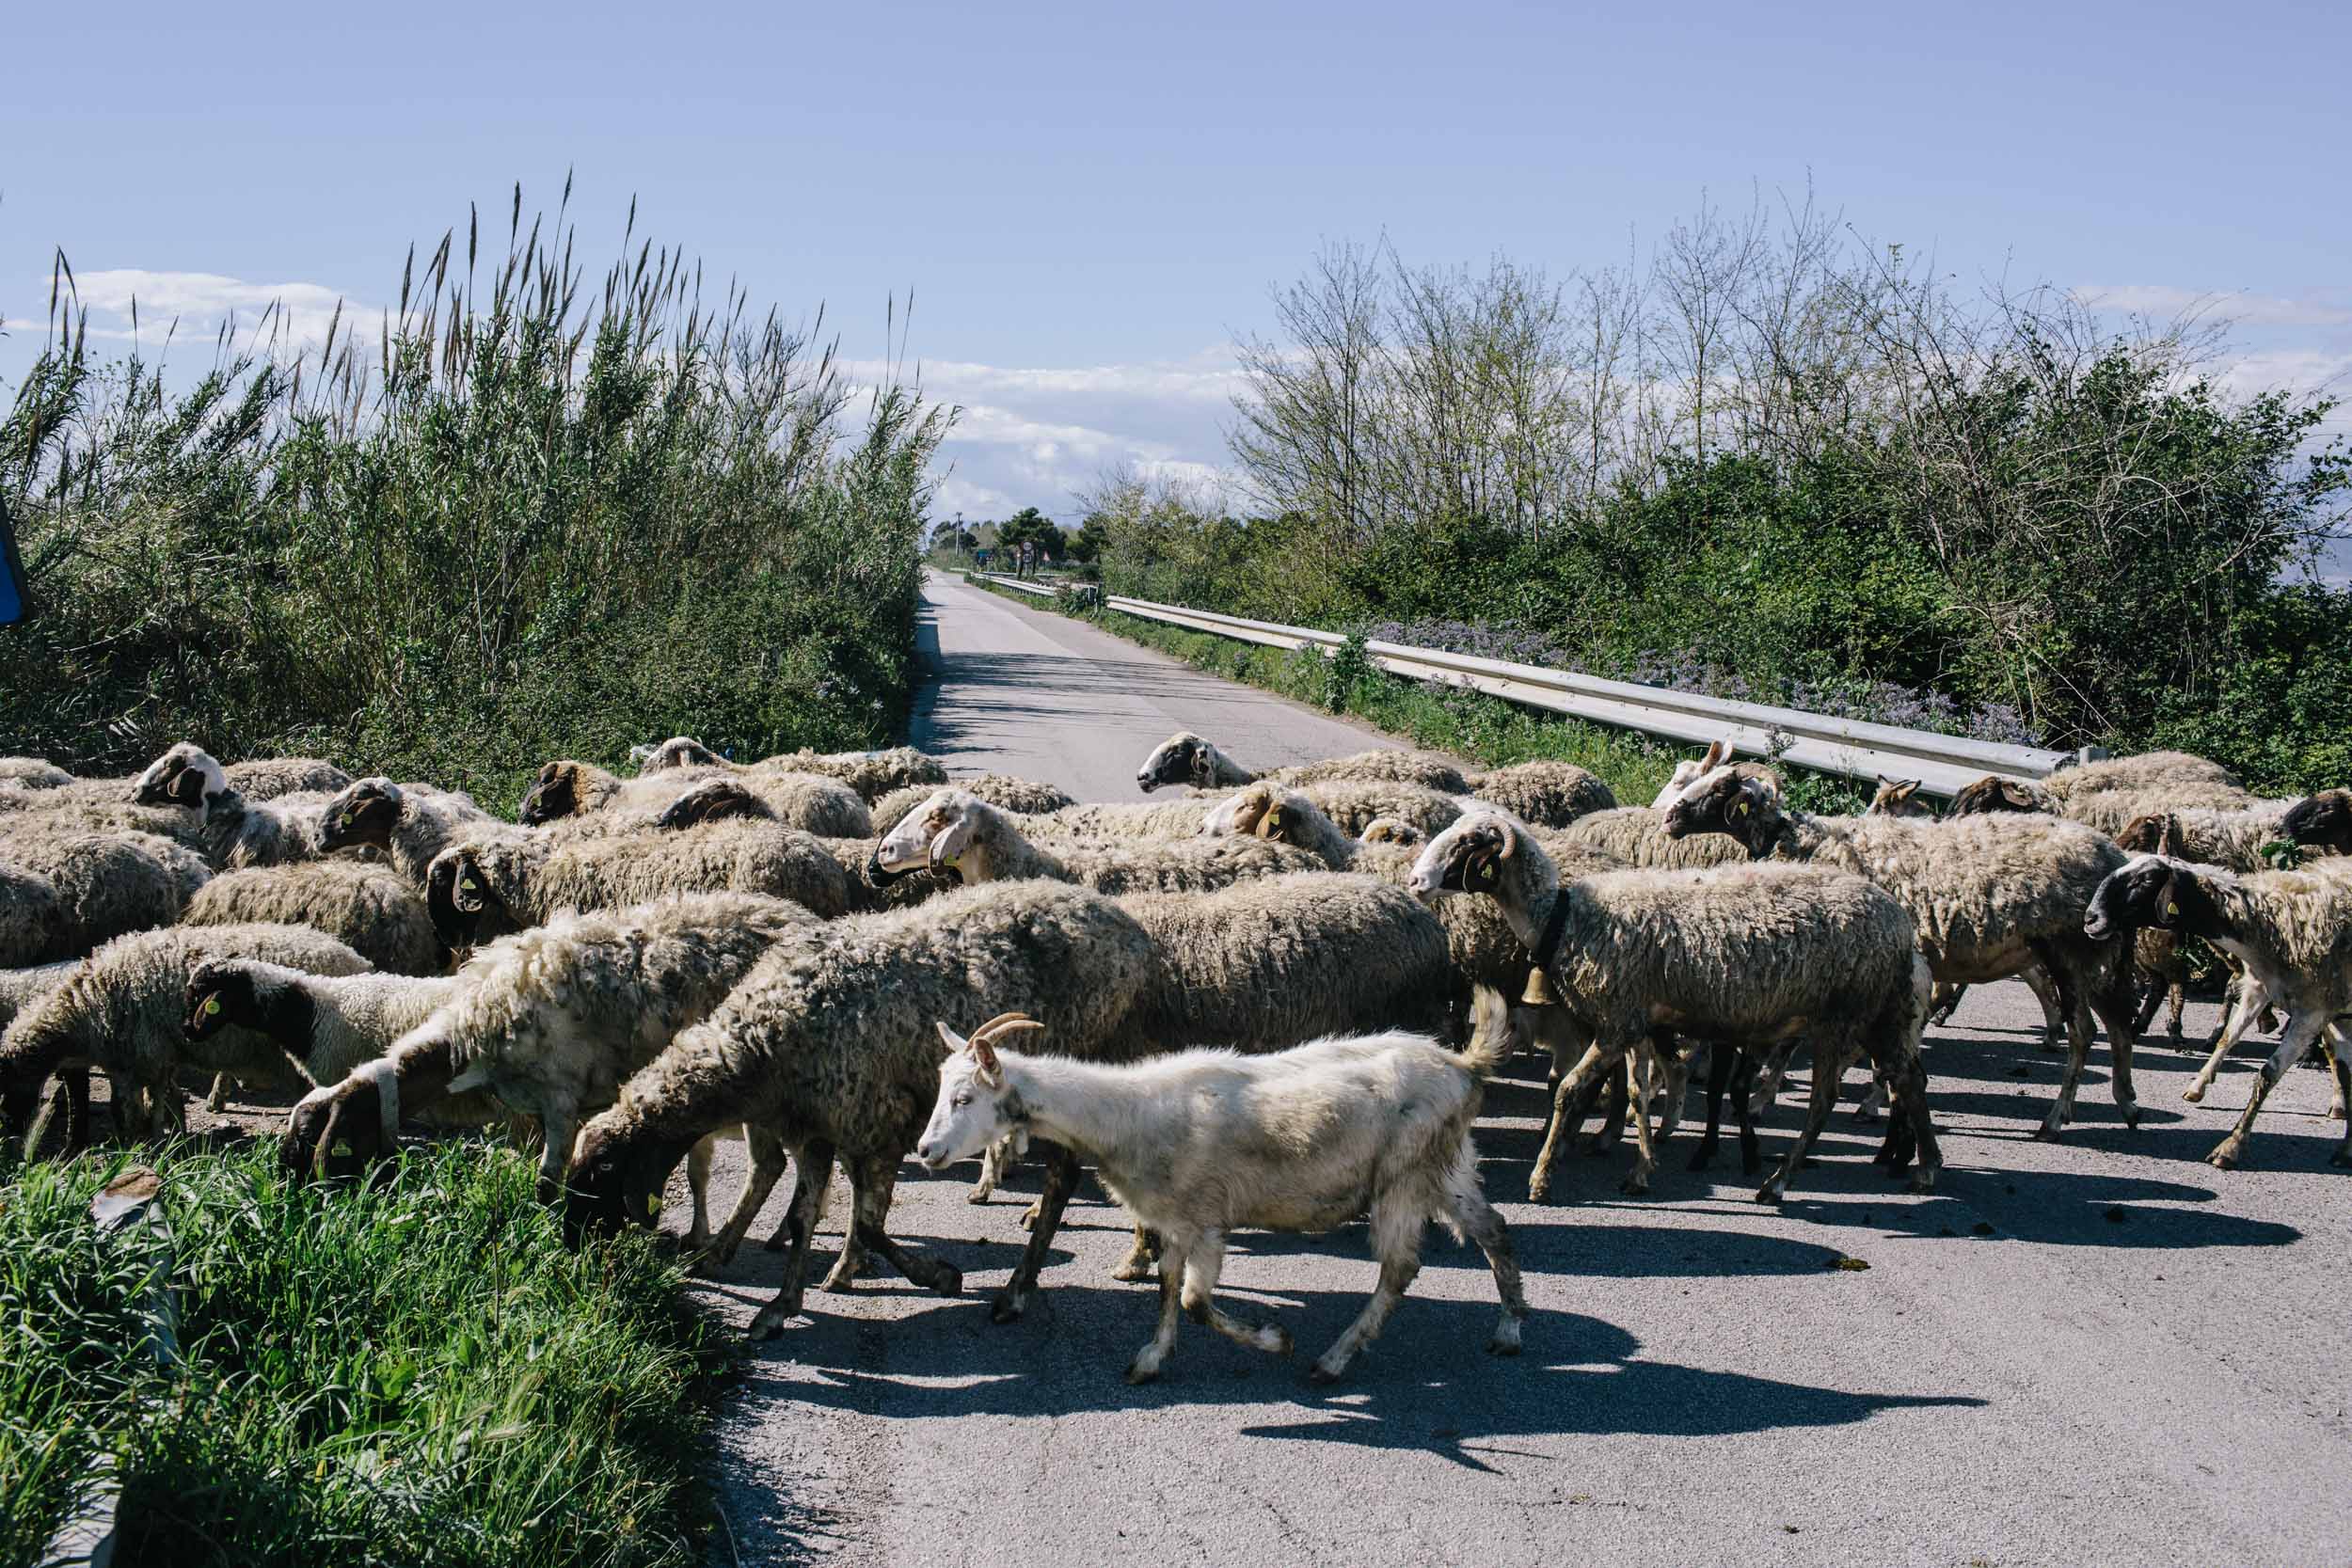 A herd of sheep cross a rural road in Southern Italy